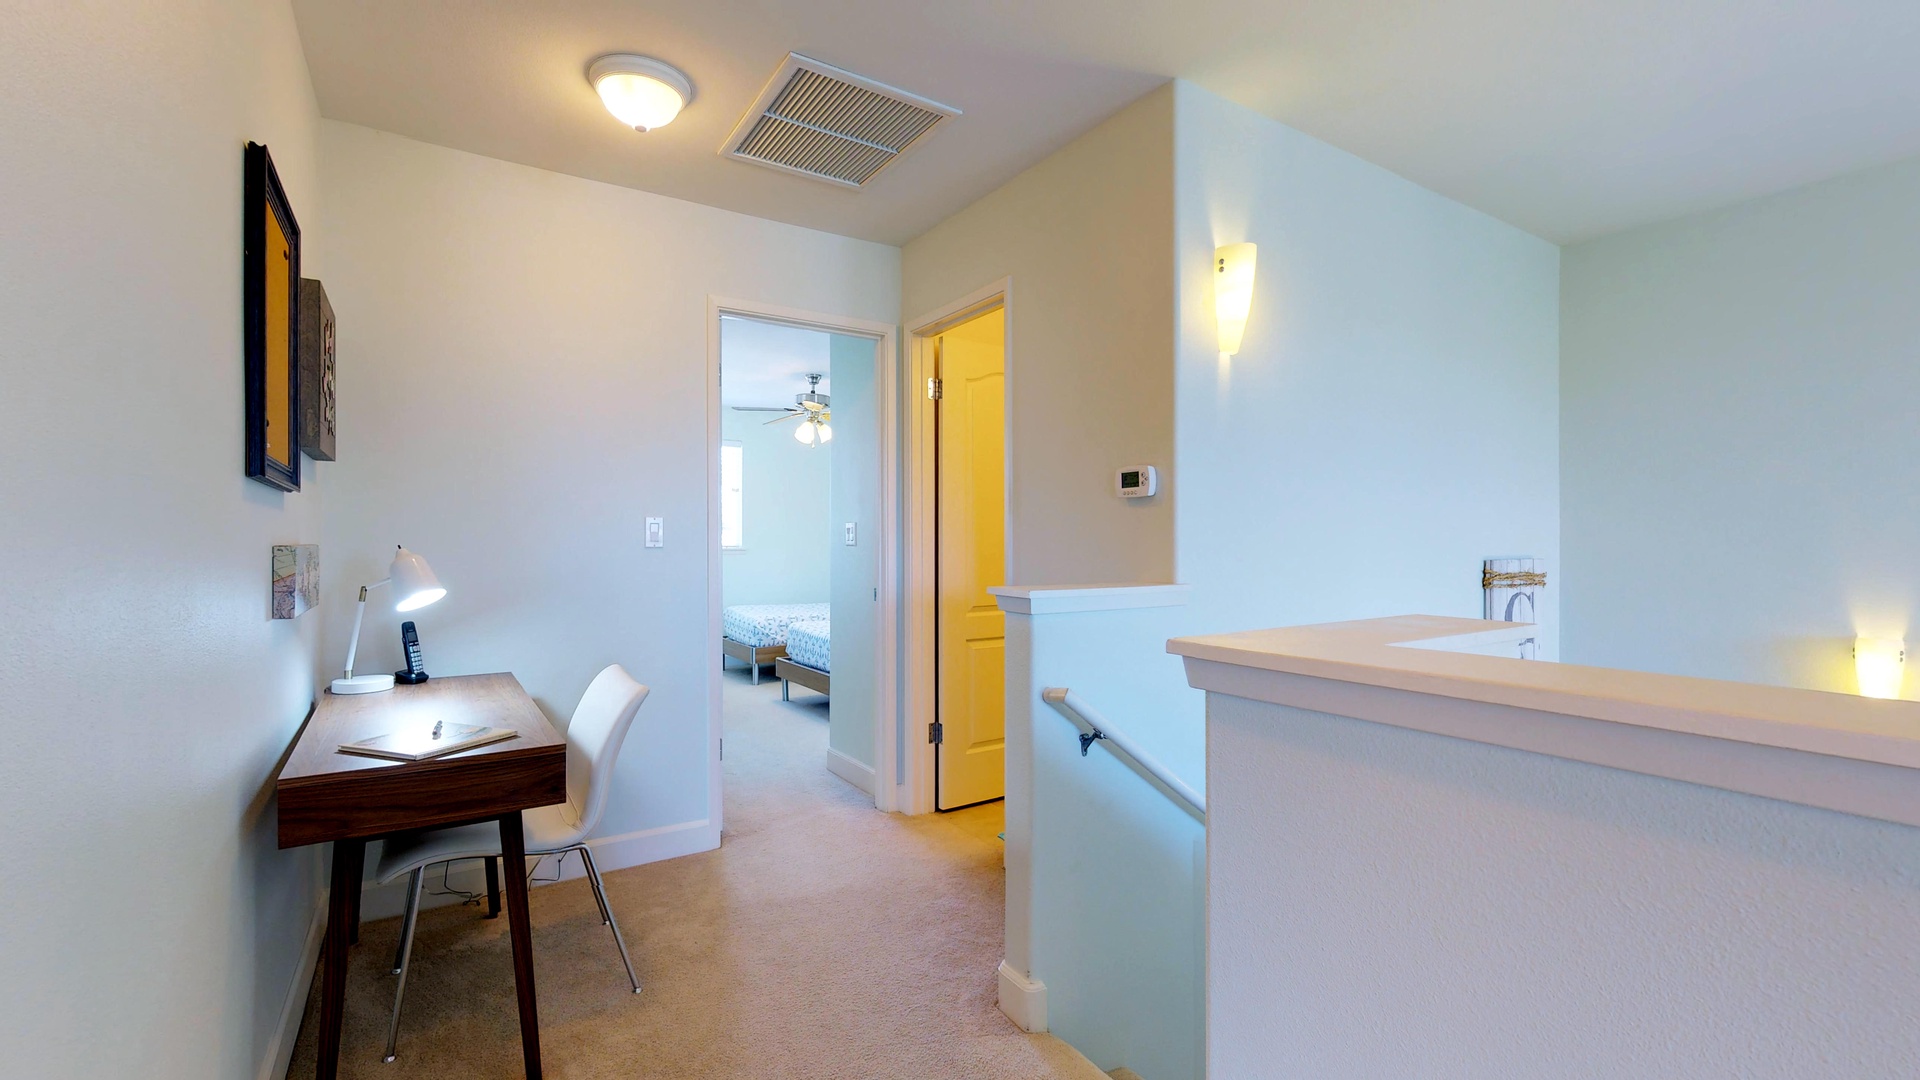 Kapolei Vacation Rentals, Ko Olina Kai 1035D - A desk and study space on the landing at the top of the stairs.